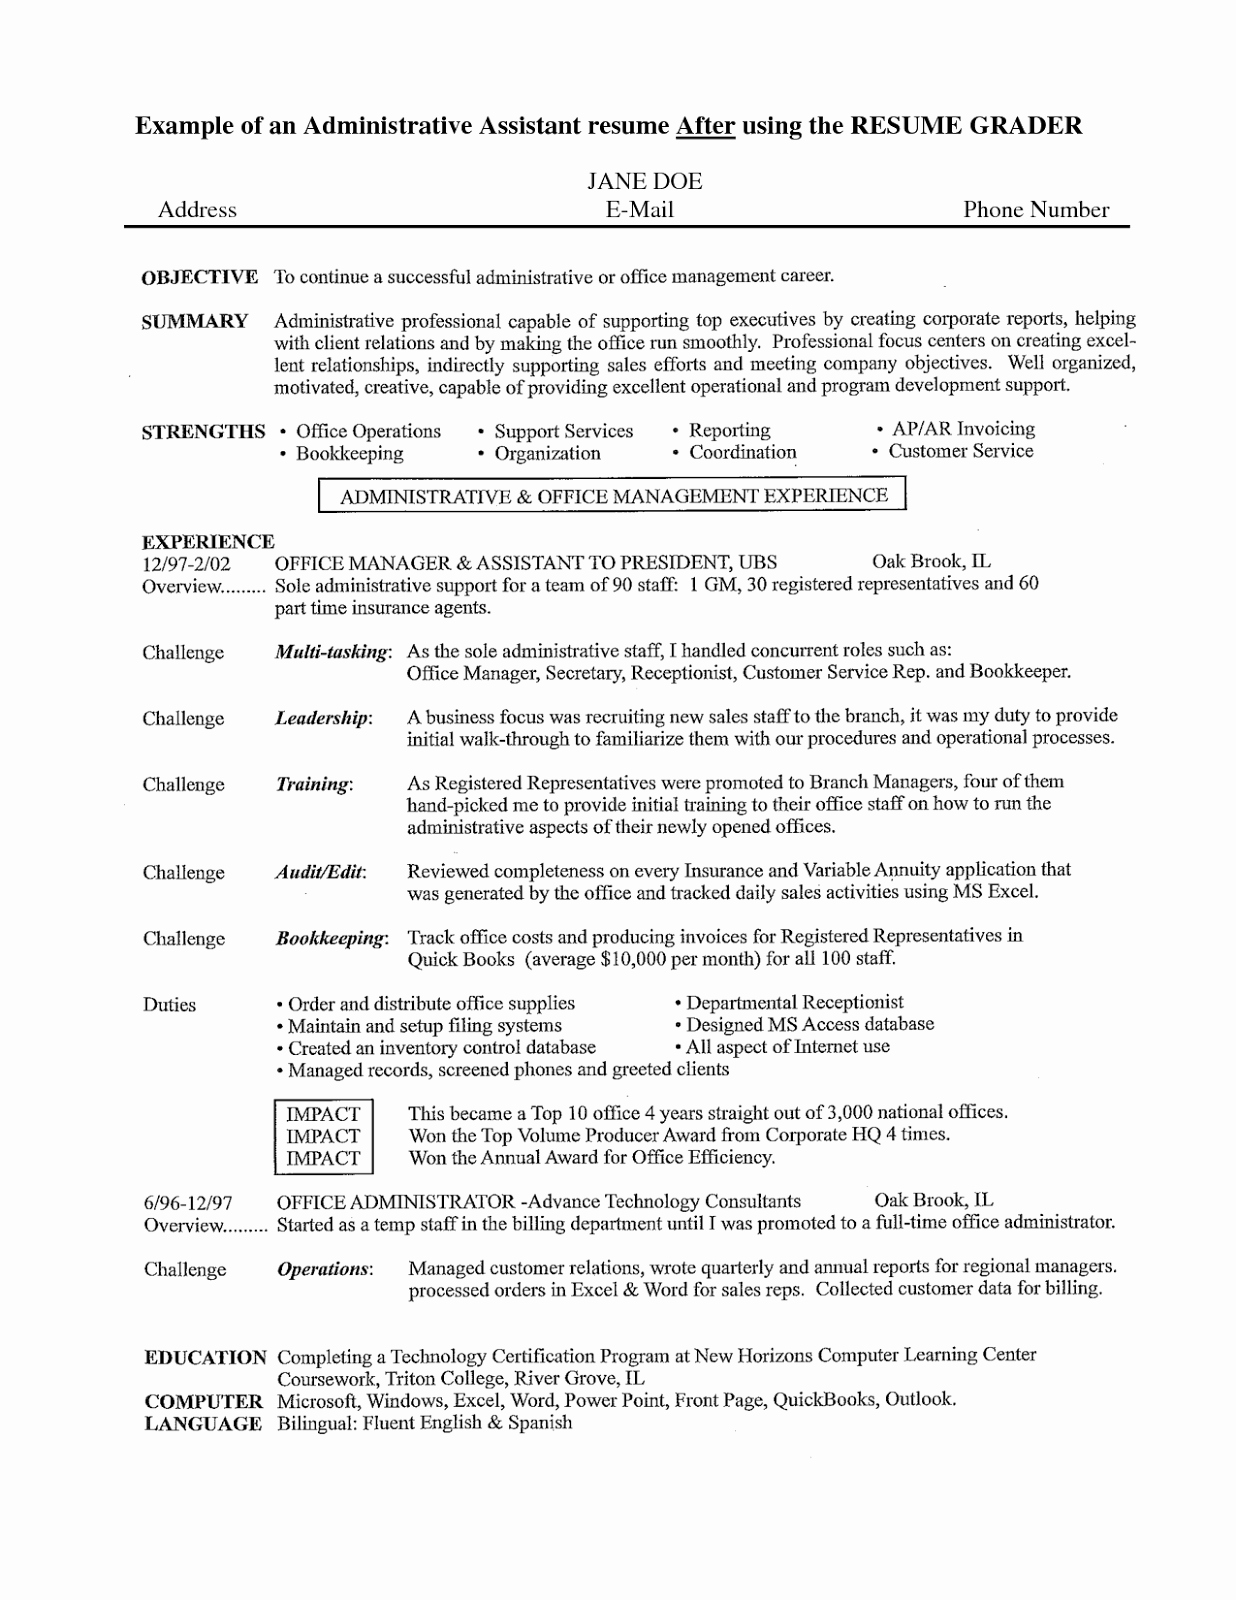 Administrative assistant Resume Objective Awesome Sample Objective Resume for Administrative assistant